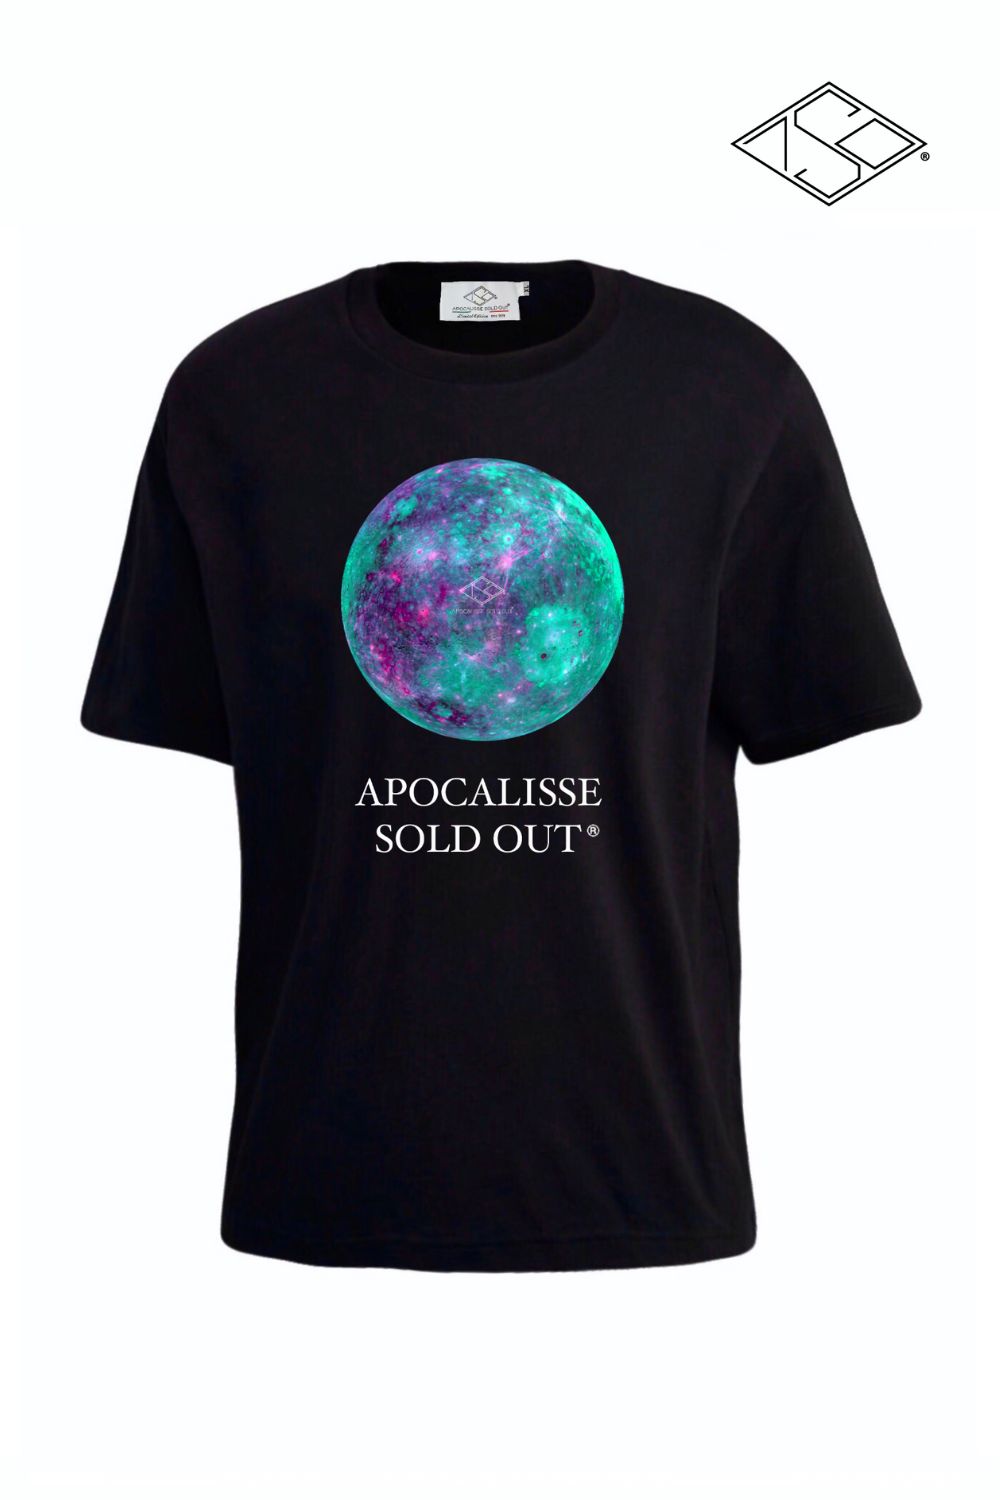 tshirt Apocalisse TOP PLANET by ApocalisseSoldOut® Fashion Brand